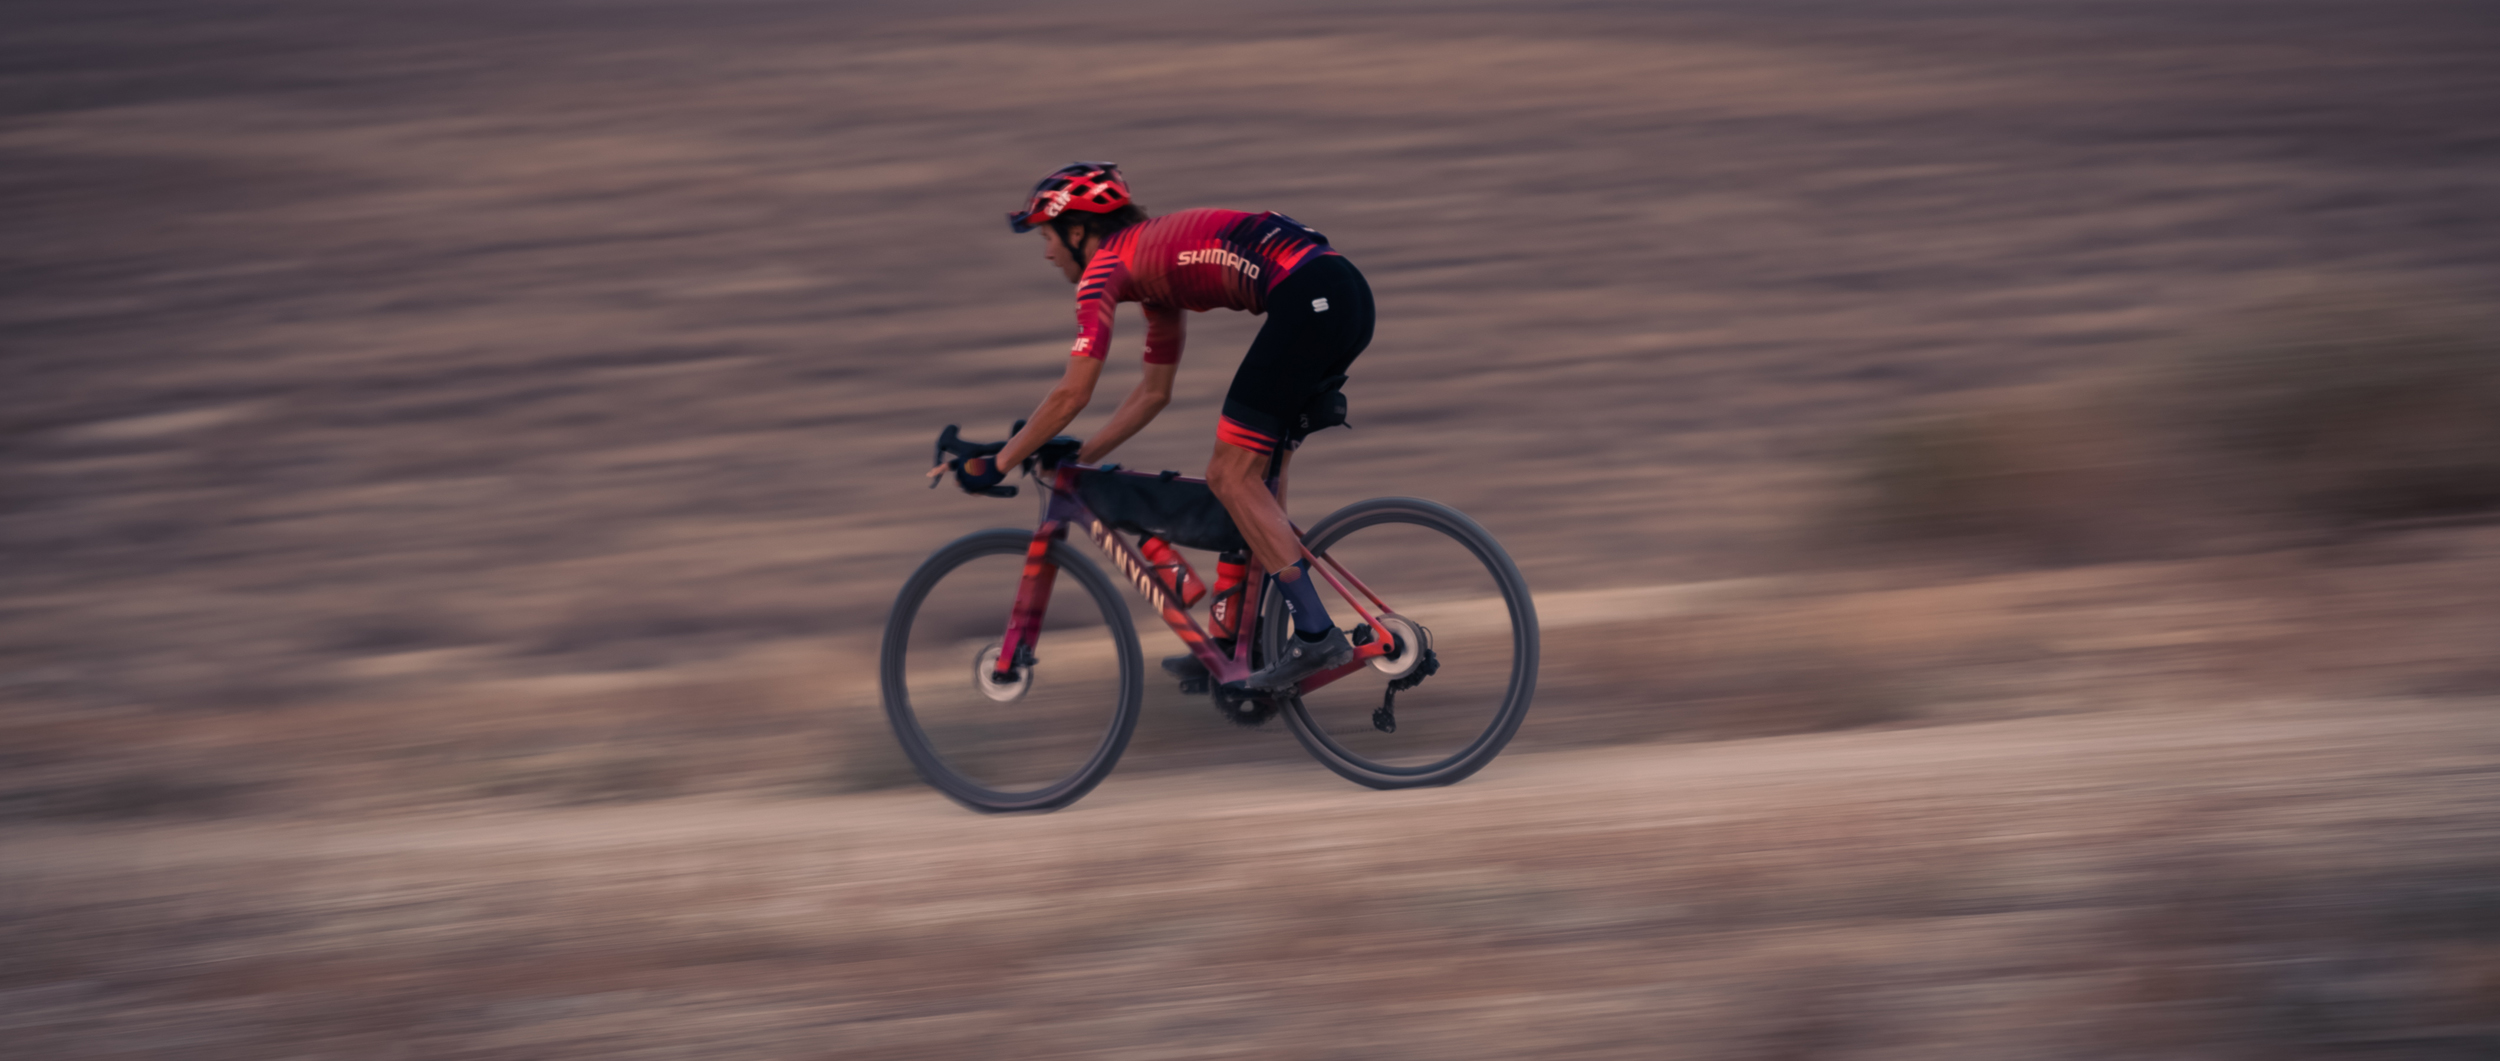 Peter Stetina riding gravel in Reno the Art of Grind 